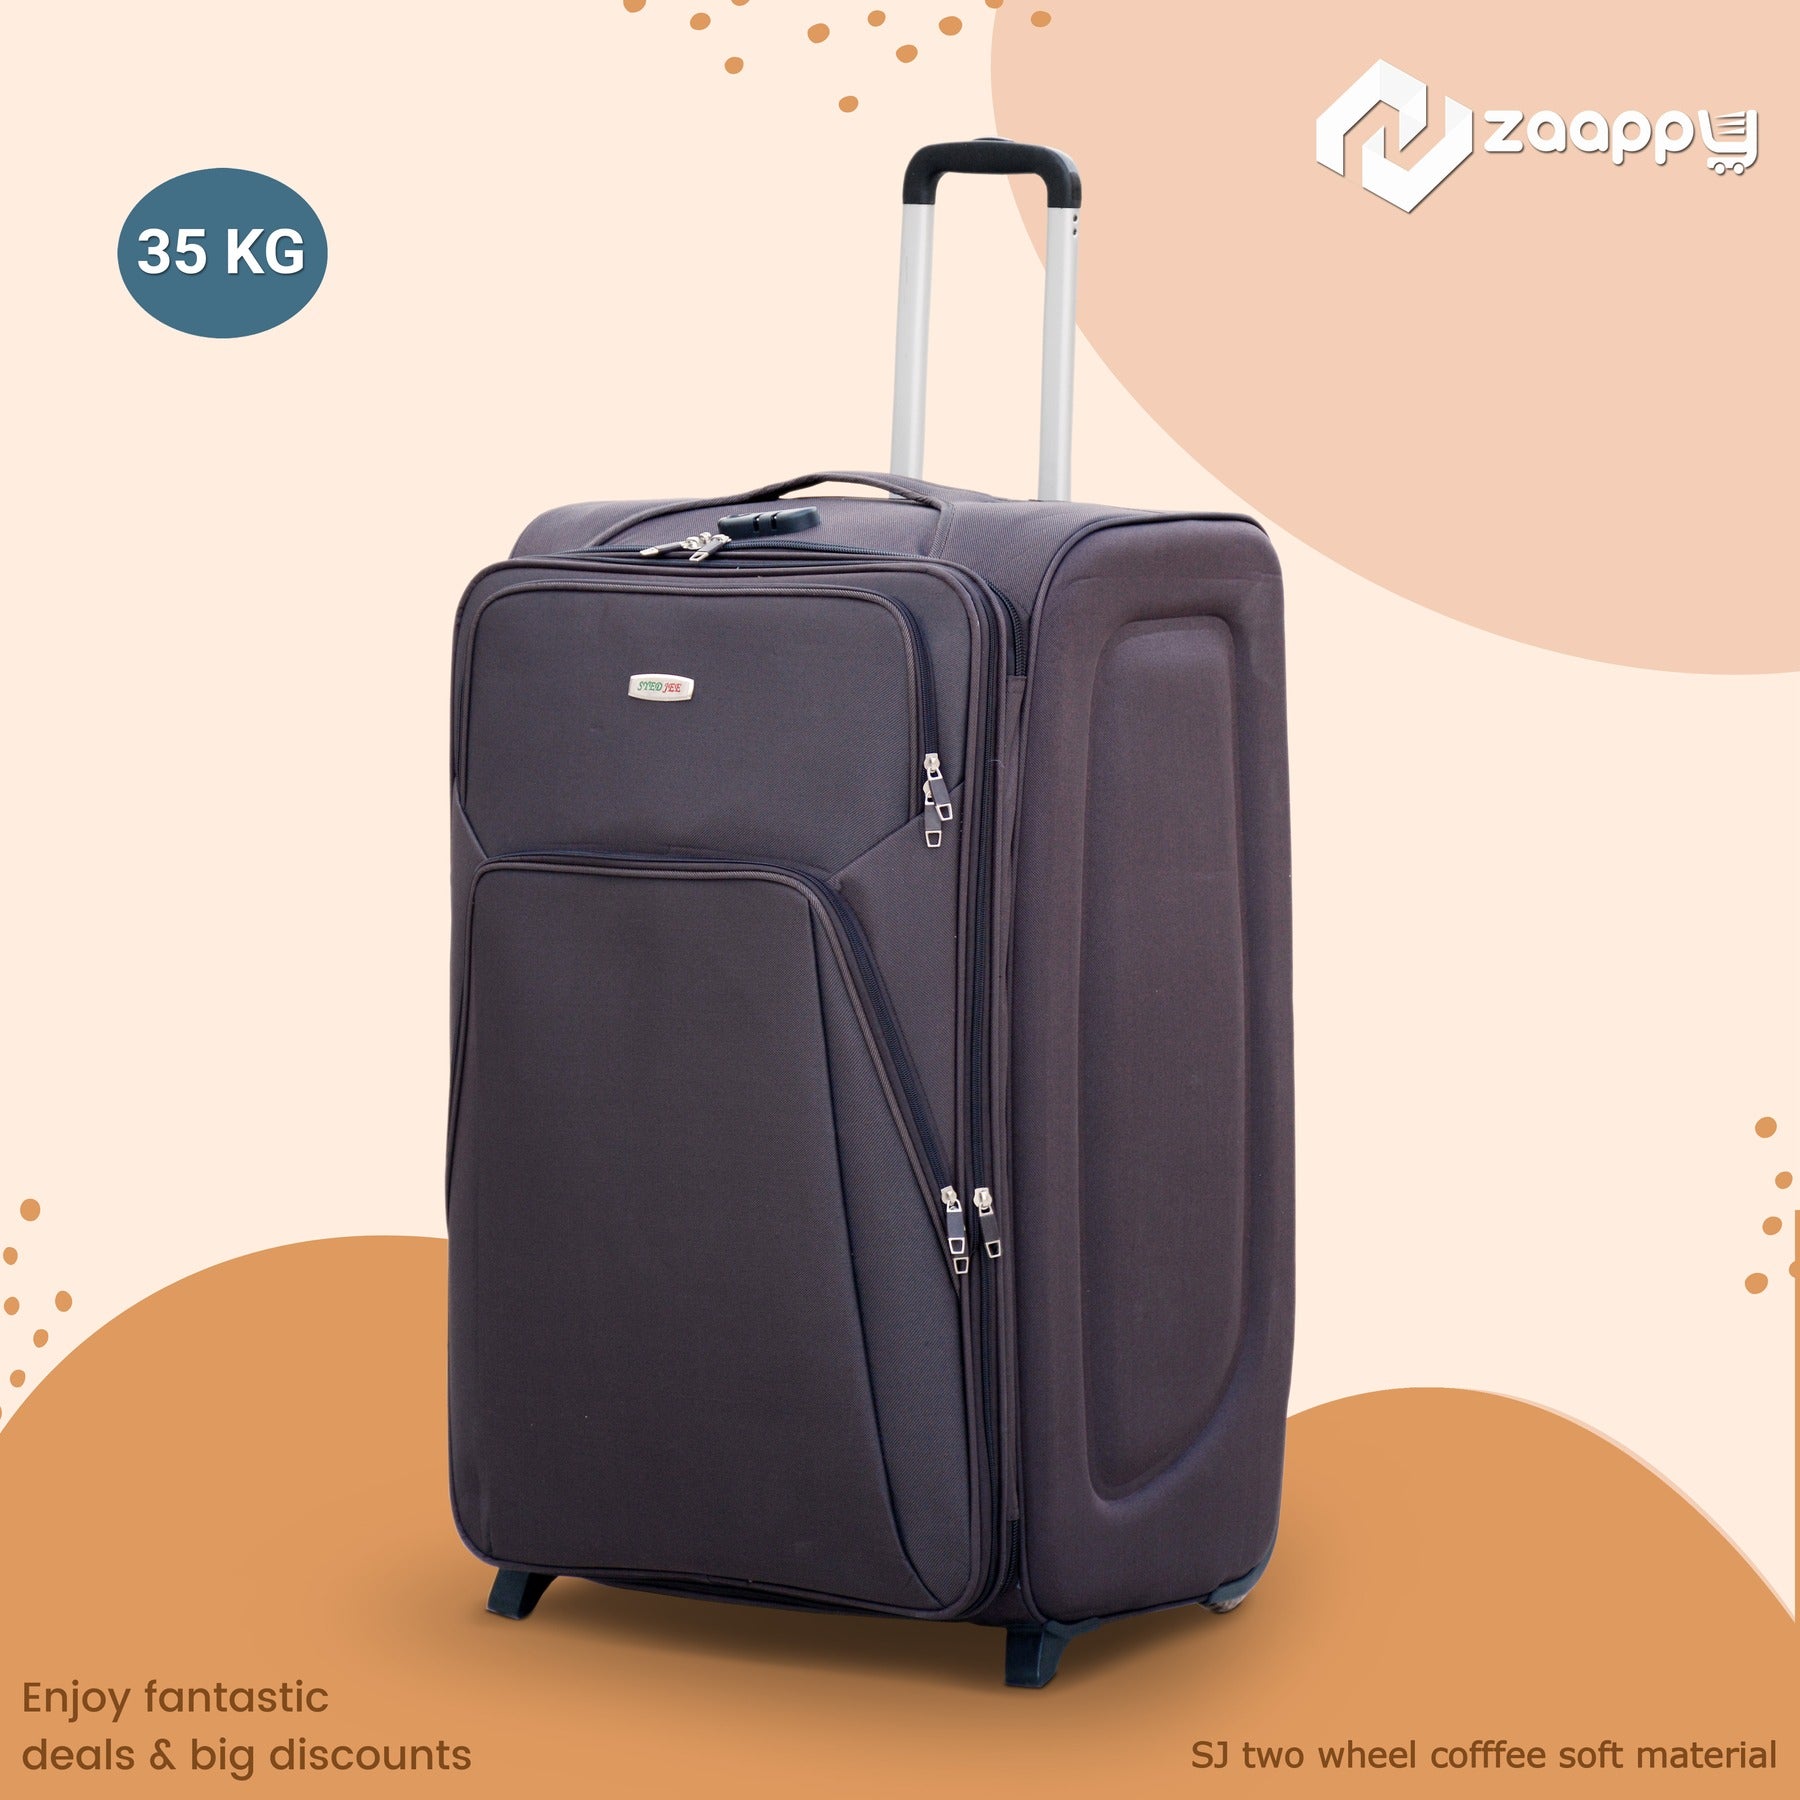 Soft Material Luggage Coffee Colour 30-35 Kg 2 Wheel Travel Luggage Zaappy